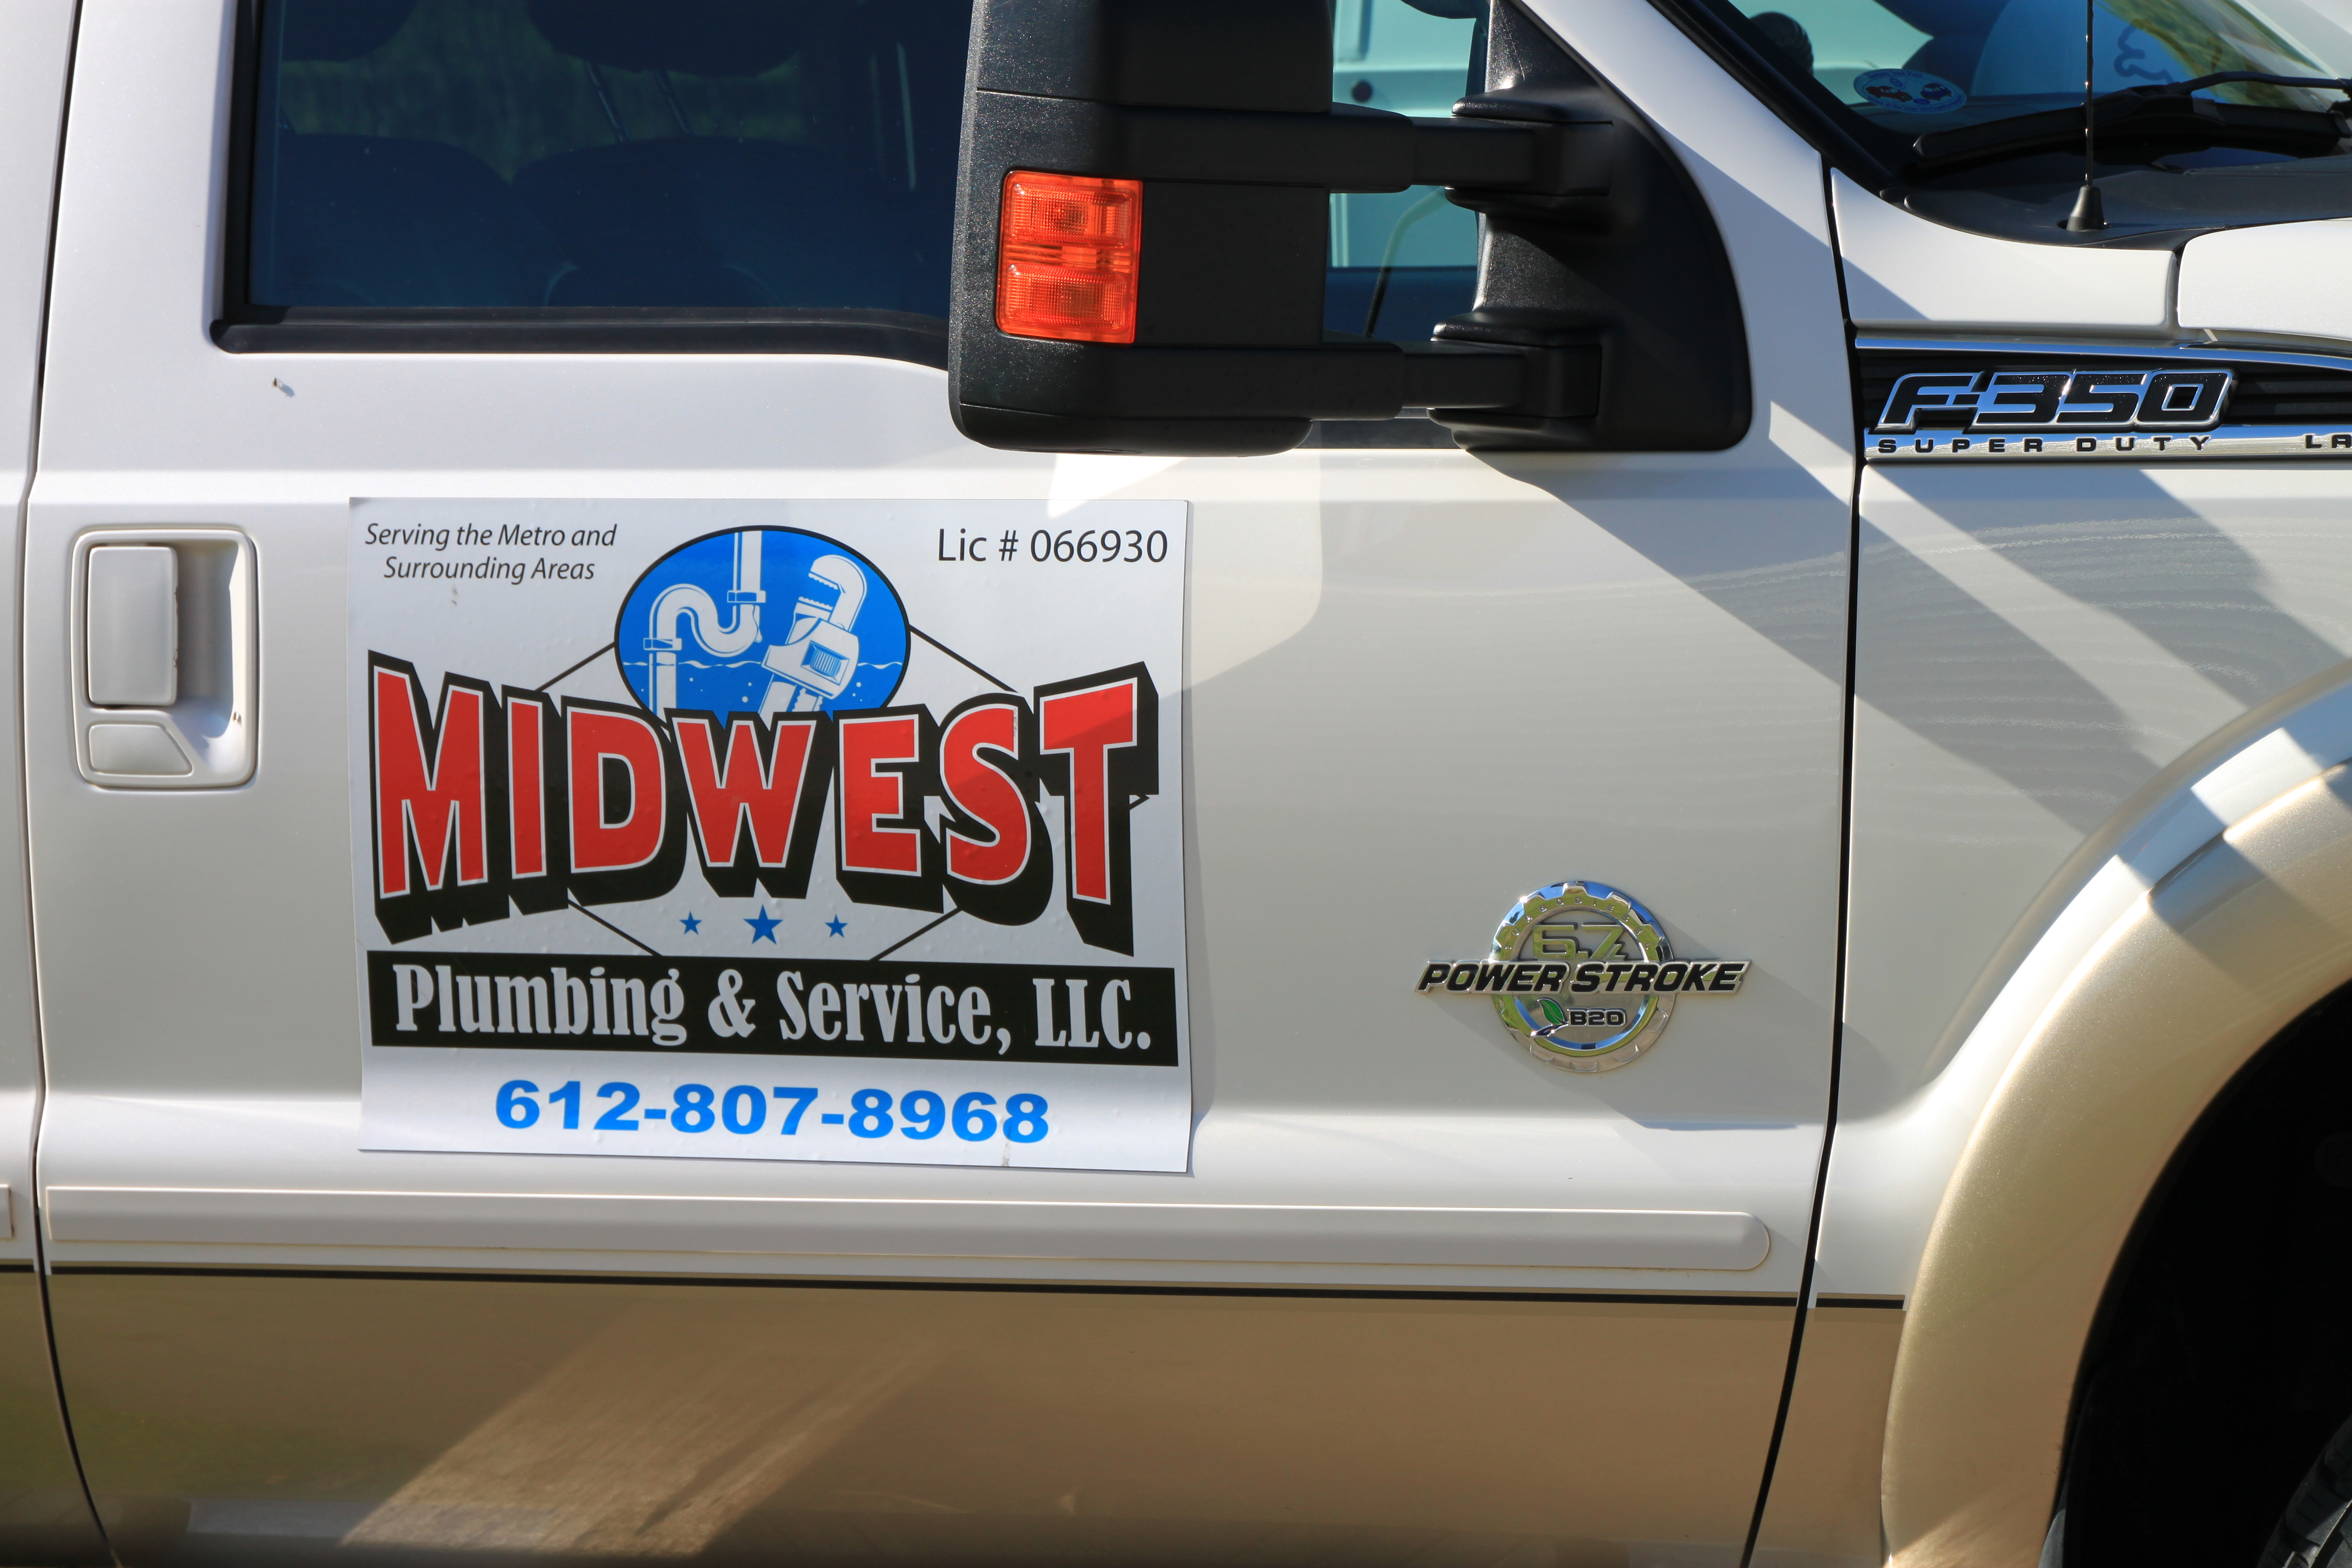 Emergency Plumber - Need Someone Fast & Reliable? Call BWS!